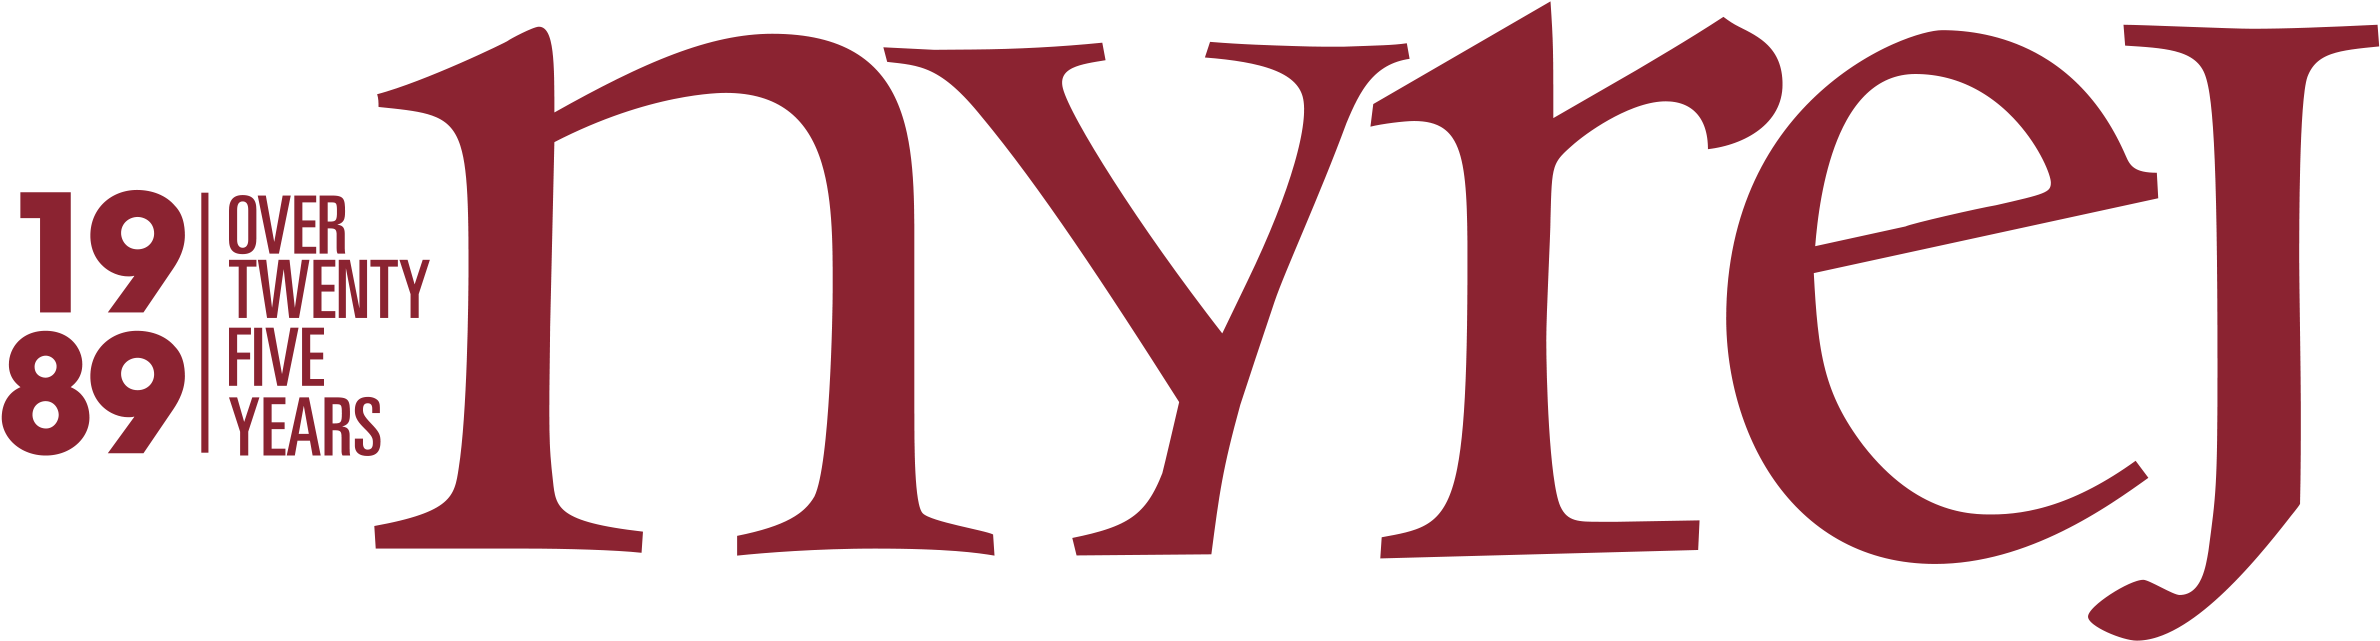 Yonkers Ida Partners With Building And Construction - New York Real Estate Journal Logo (2392x652)